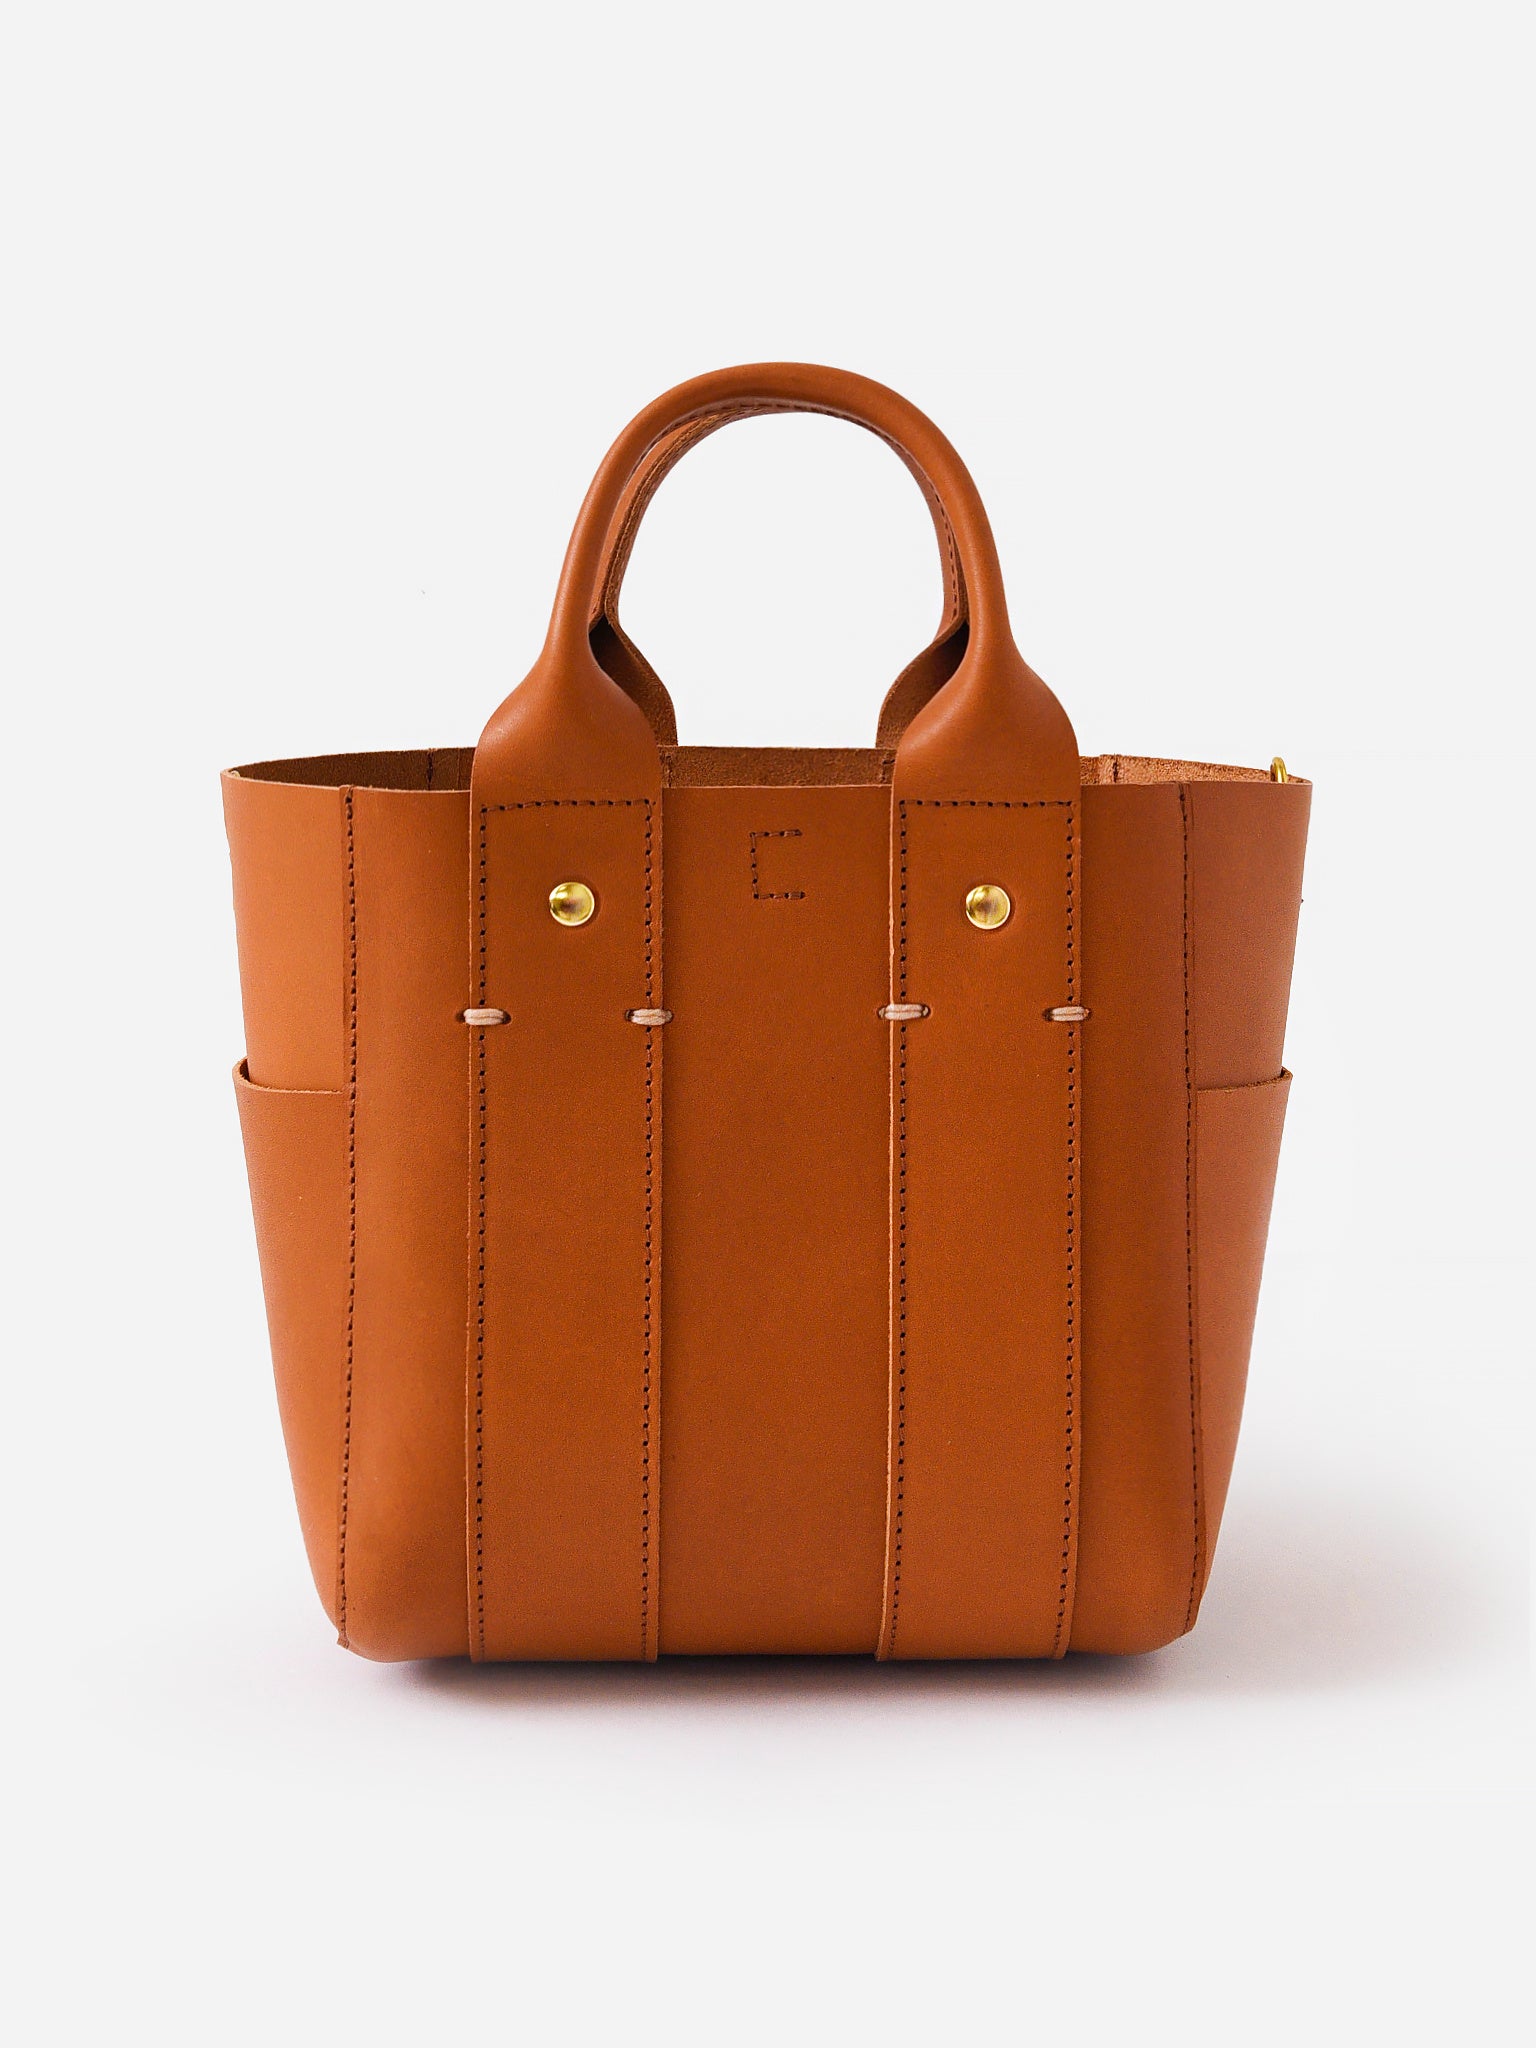 Clare V. Leather Tote Bag - Brown Totes, Handbags - W2437165